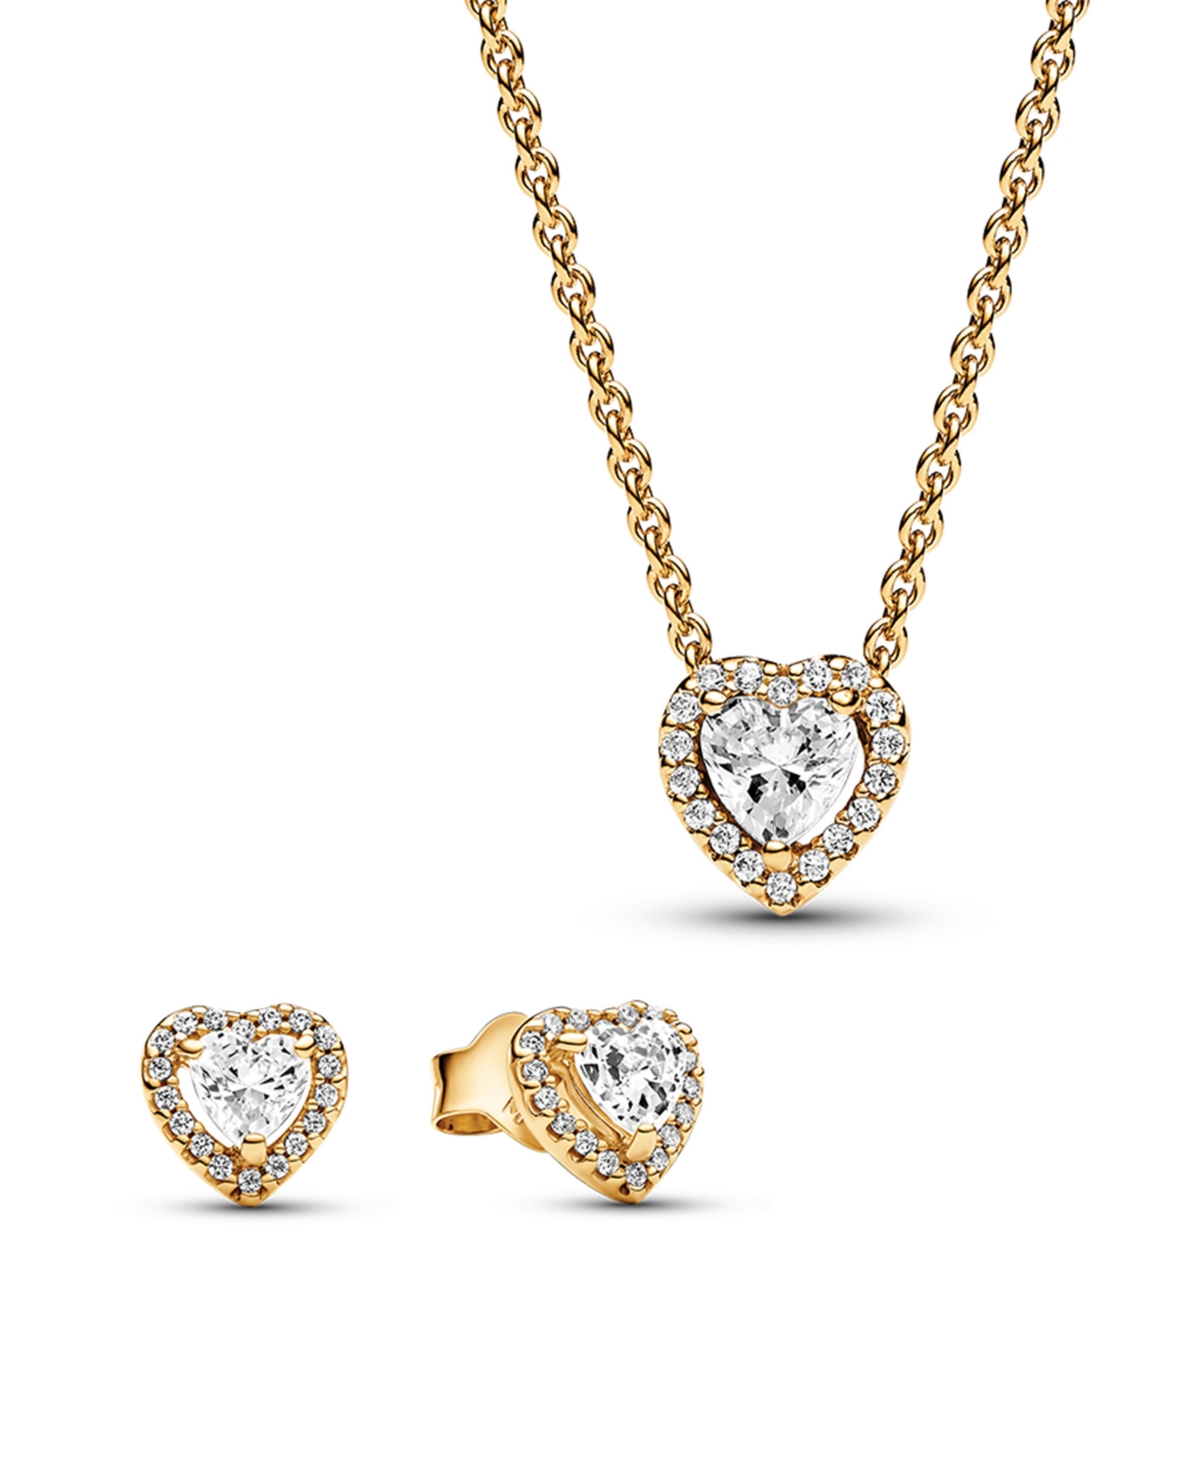 Sterling Silver Sparkling Cubic Zirconia Double Heart Halo Necklace and Stud Earrings Jewelry Gift Set - Gold